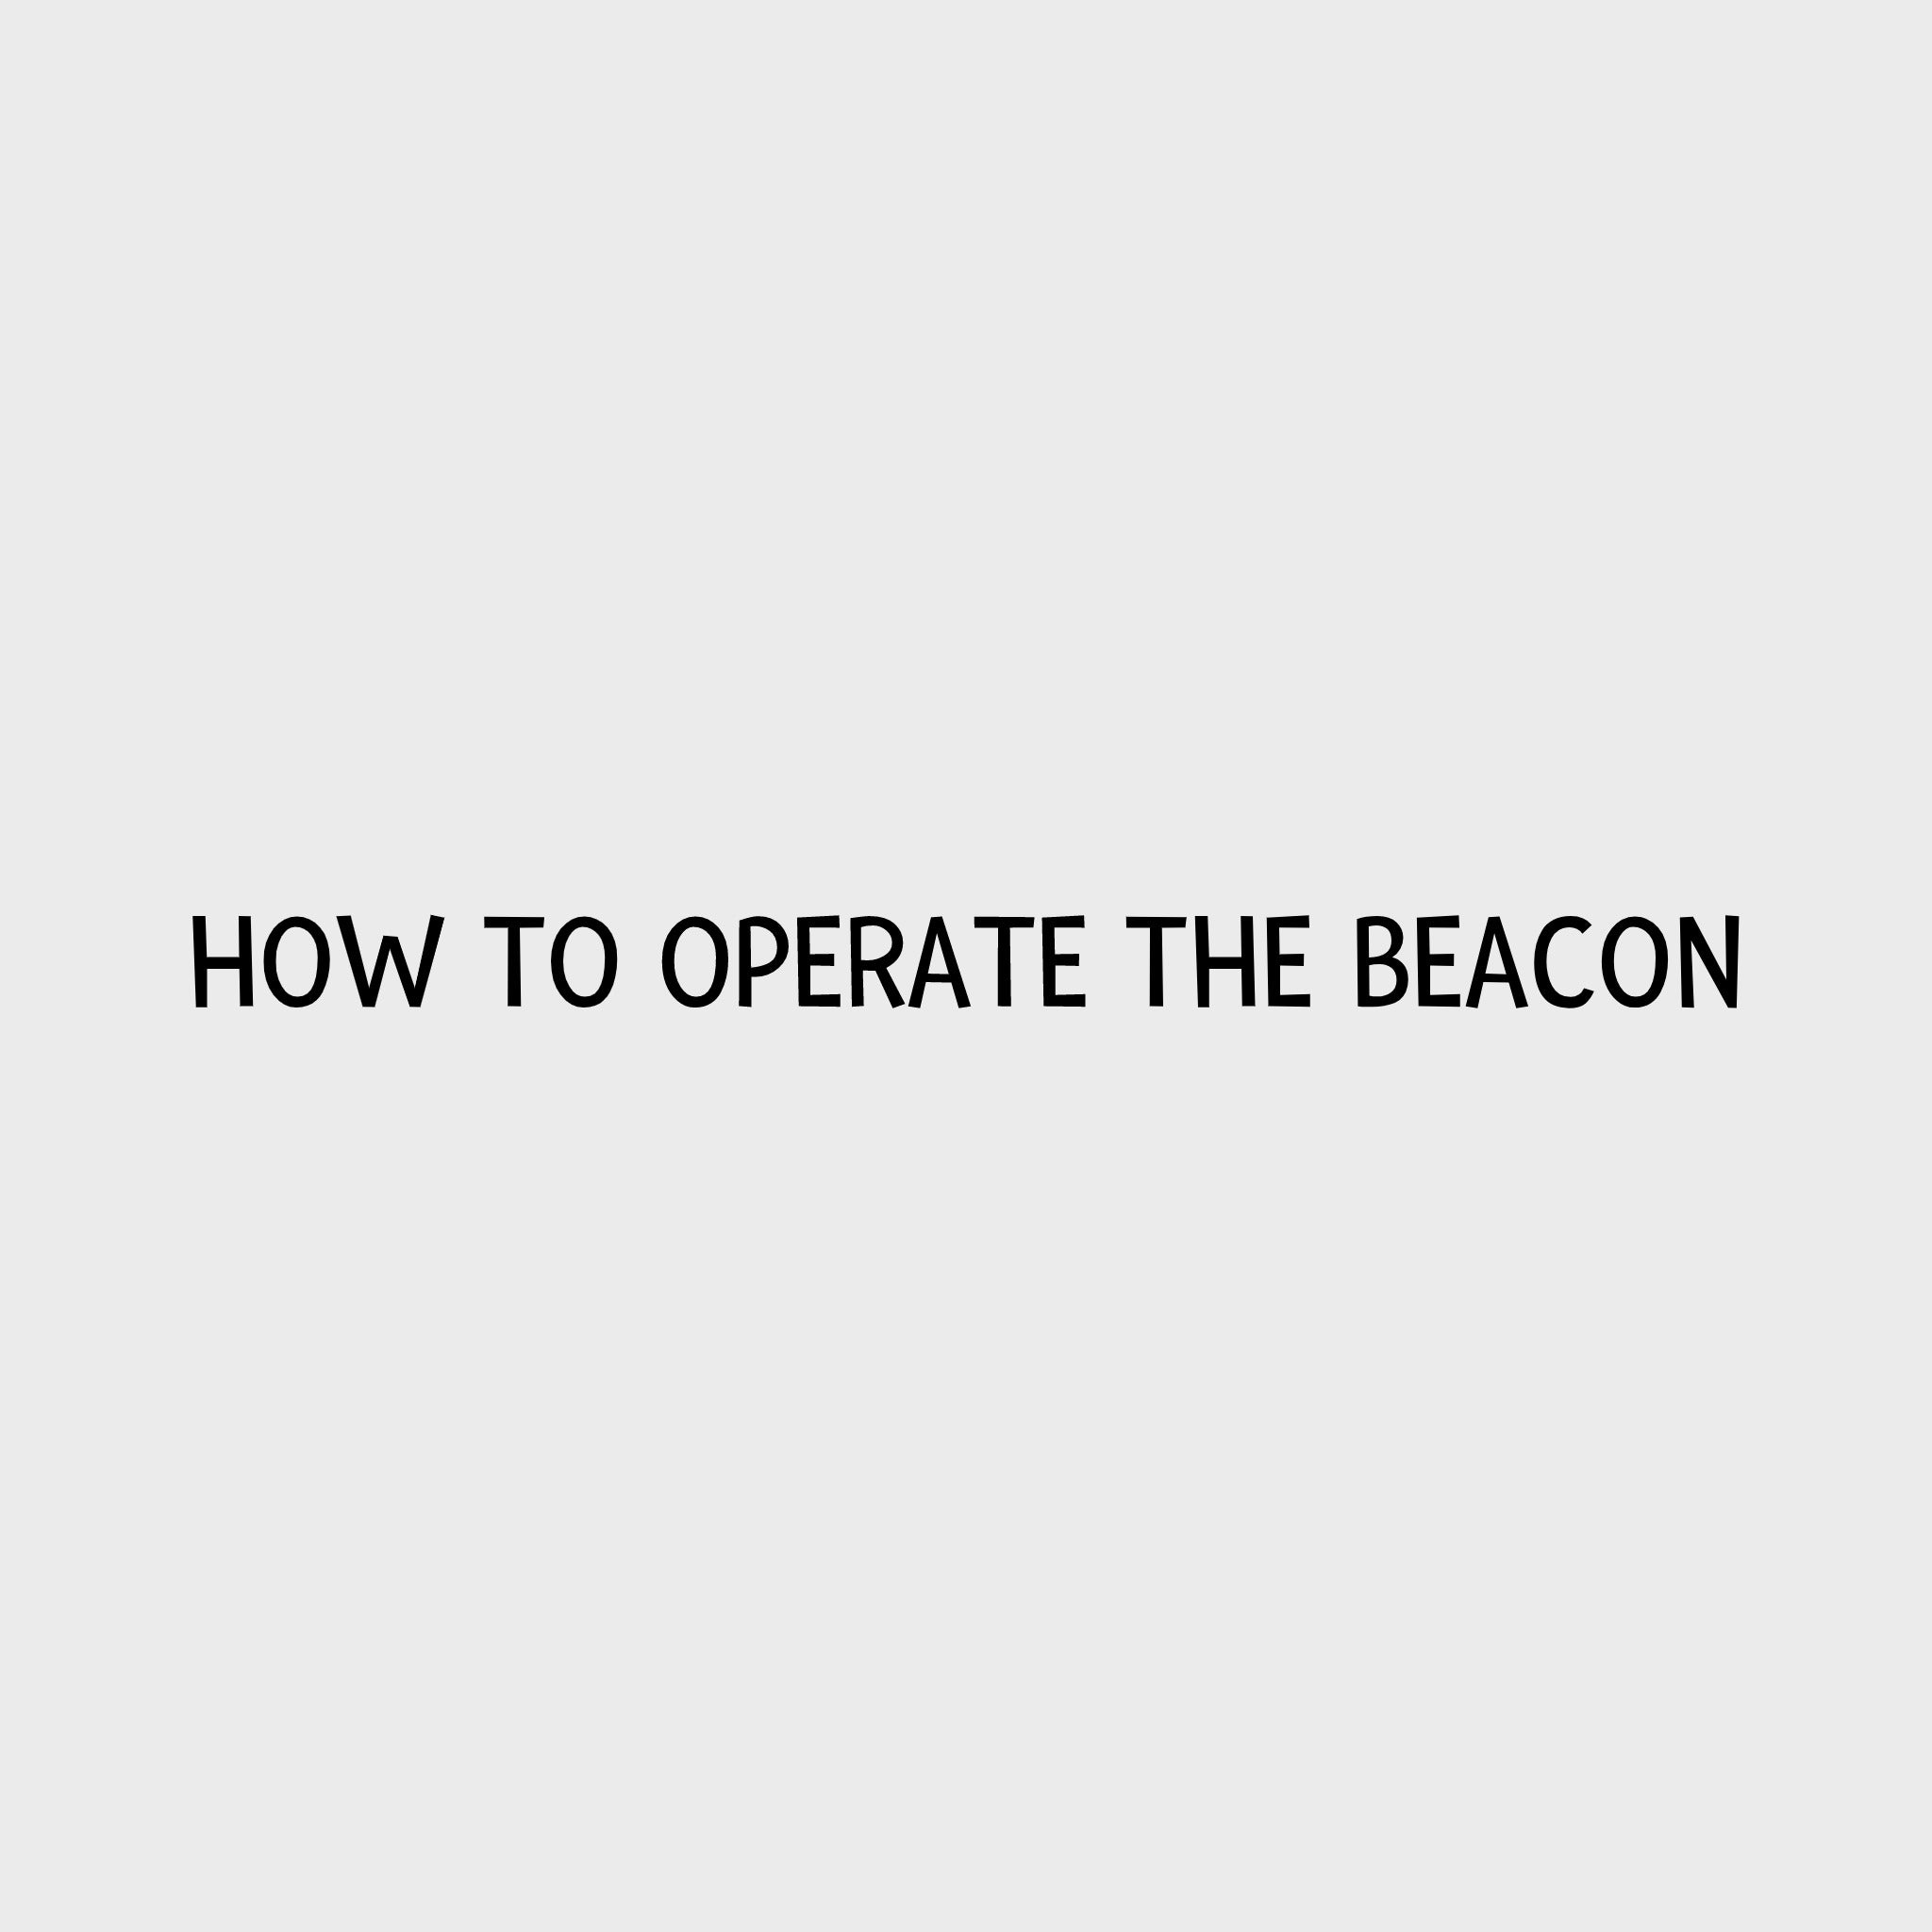 Video - How to operate the Beacon